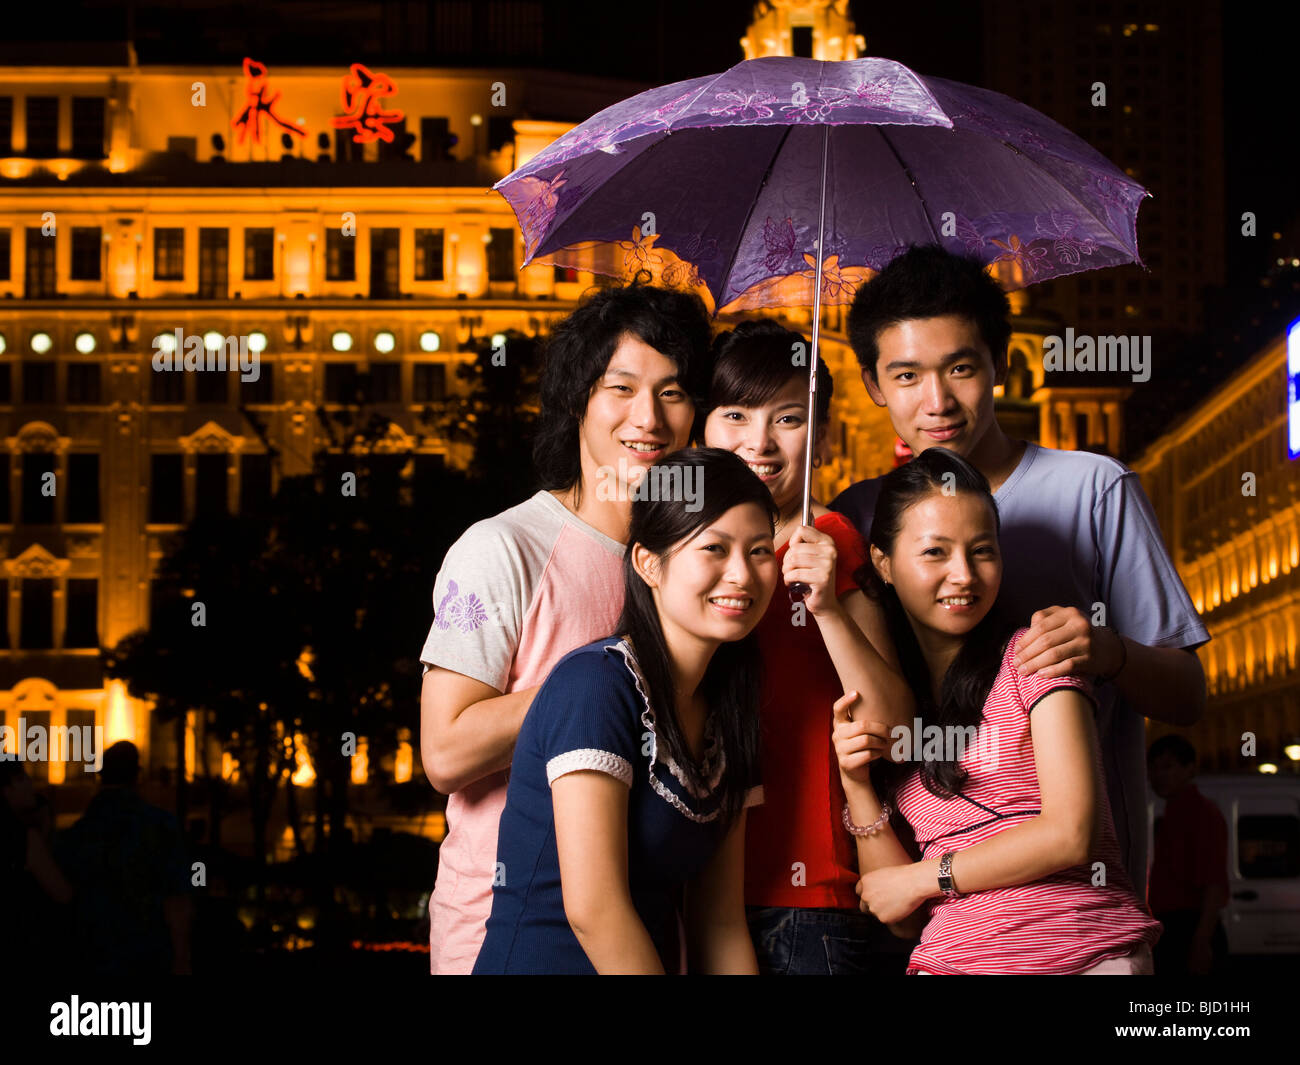 Five young people under an umbrella. Stock Photo